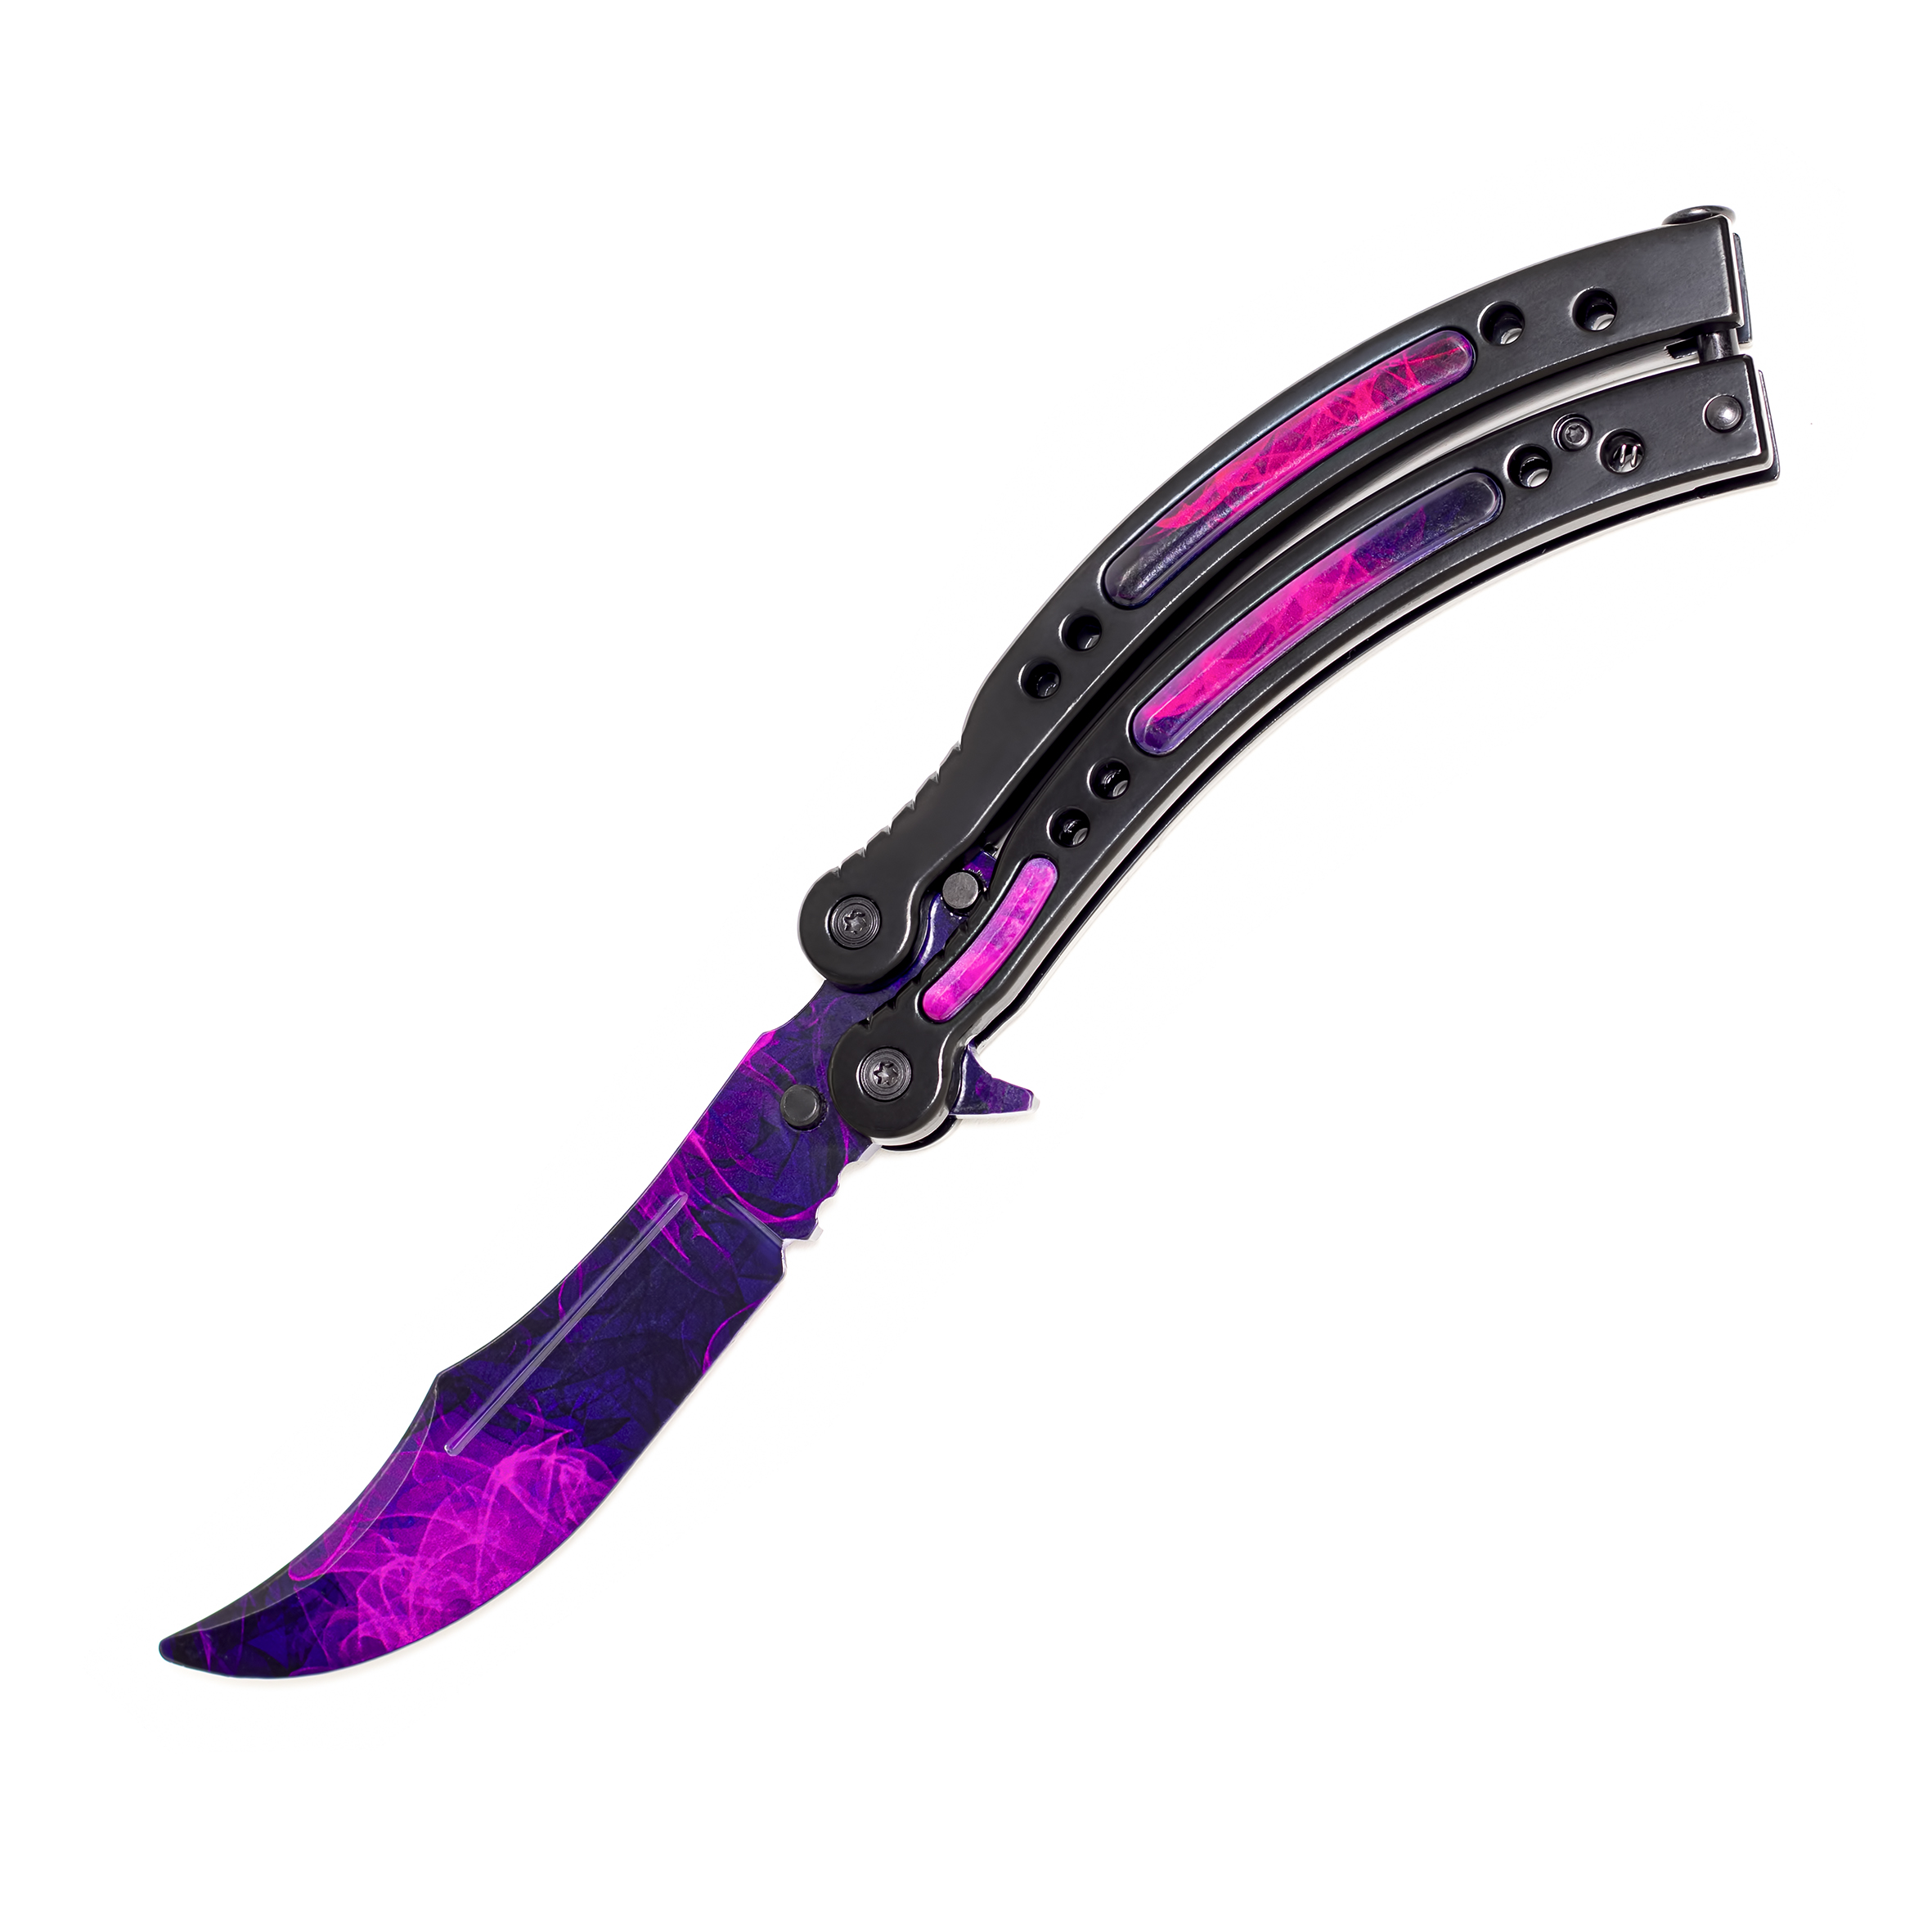 butterfly knife with rose design